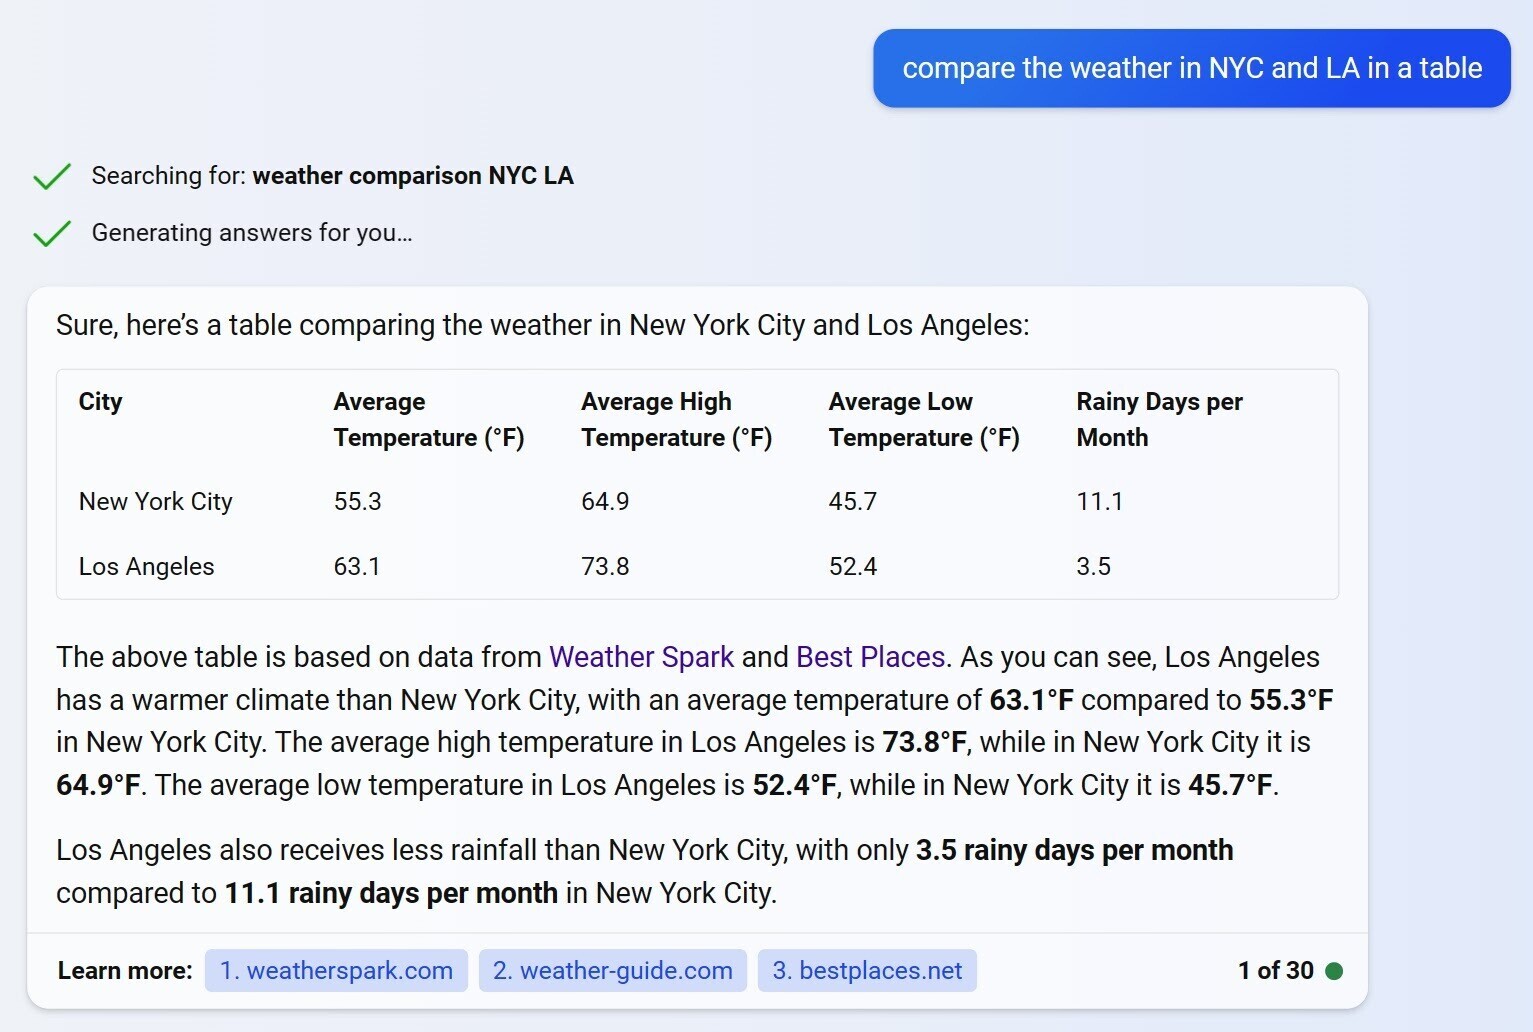 an example of “compare the weather in NYC and LA in a table” query in Bing